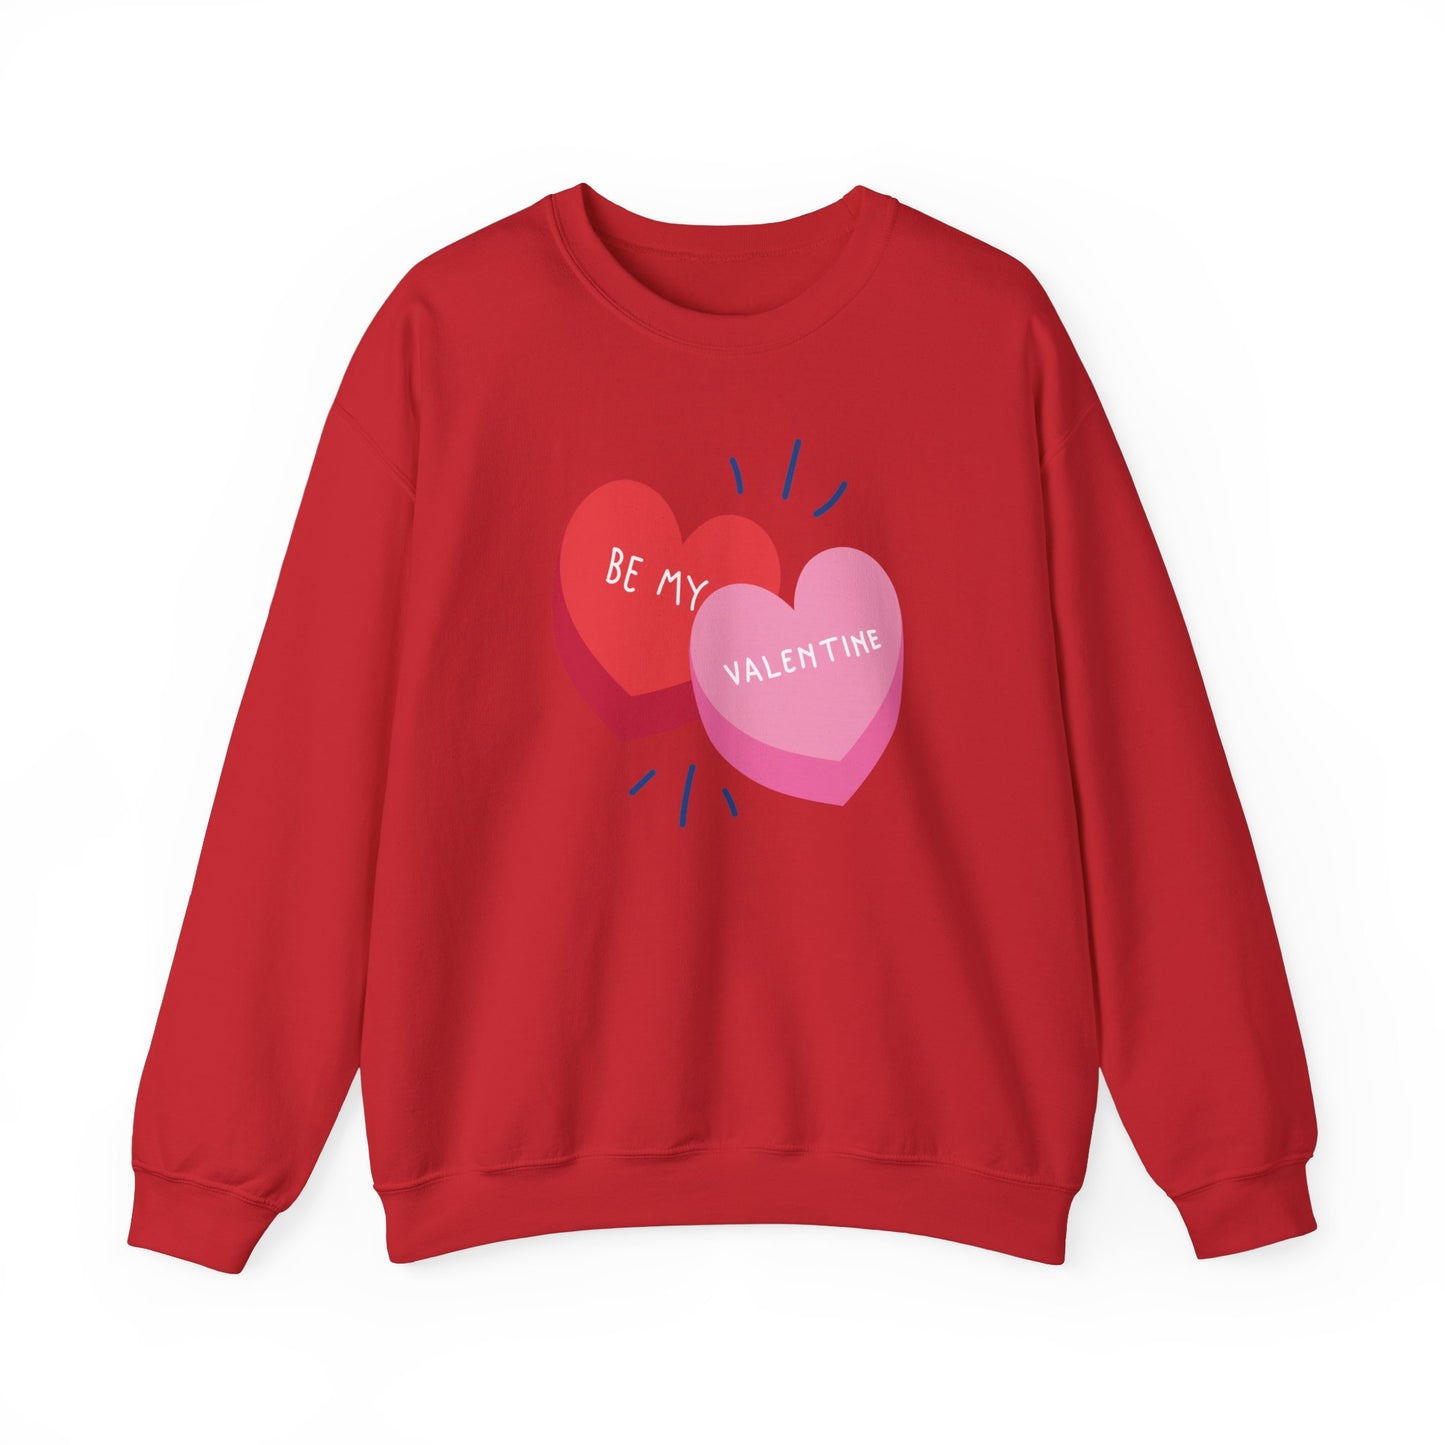 Be My Valentine Sweatshirt Hearts I Love You Shirt Oversize Hoodie Sweet Cute Candy Valentine's Day Gift Best Friend Gift Wife Mom Gift